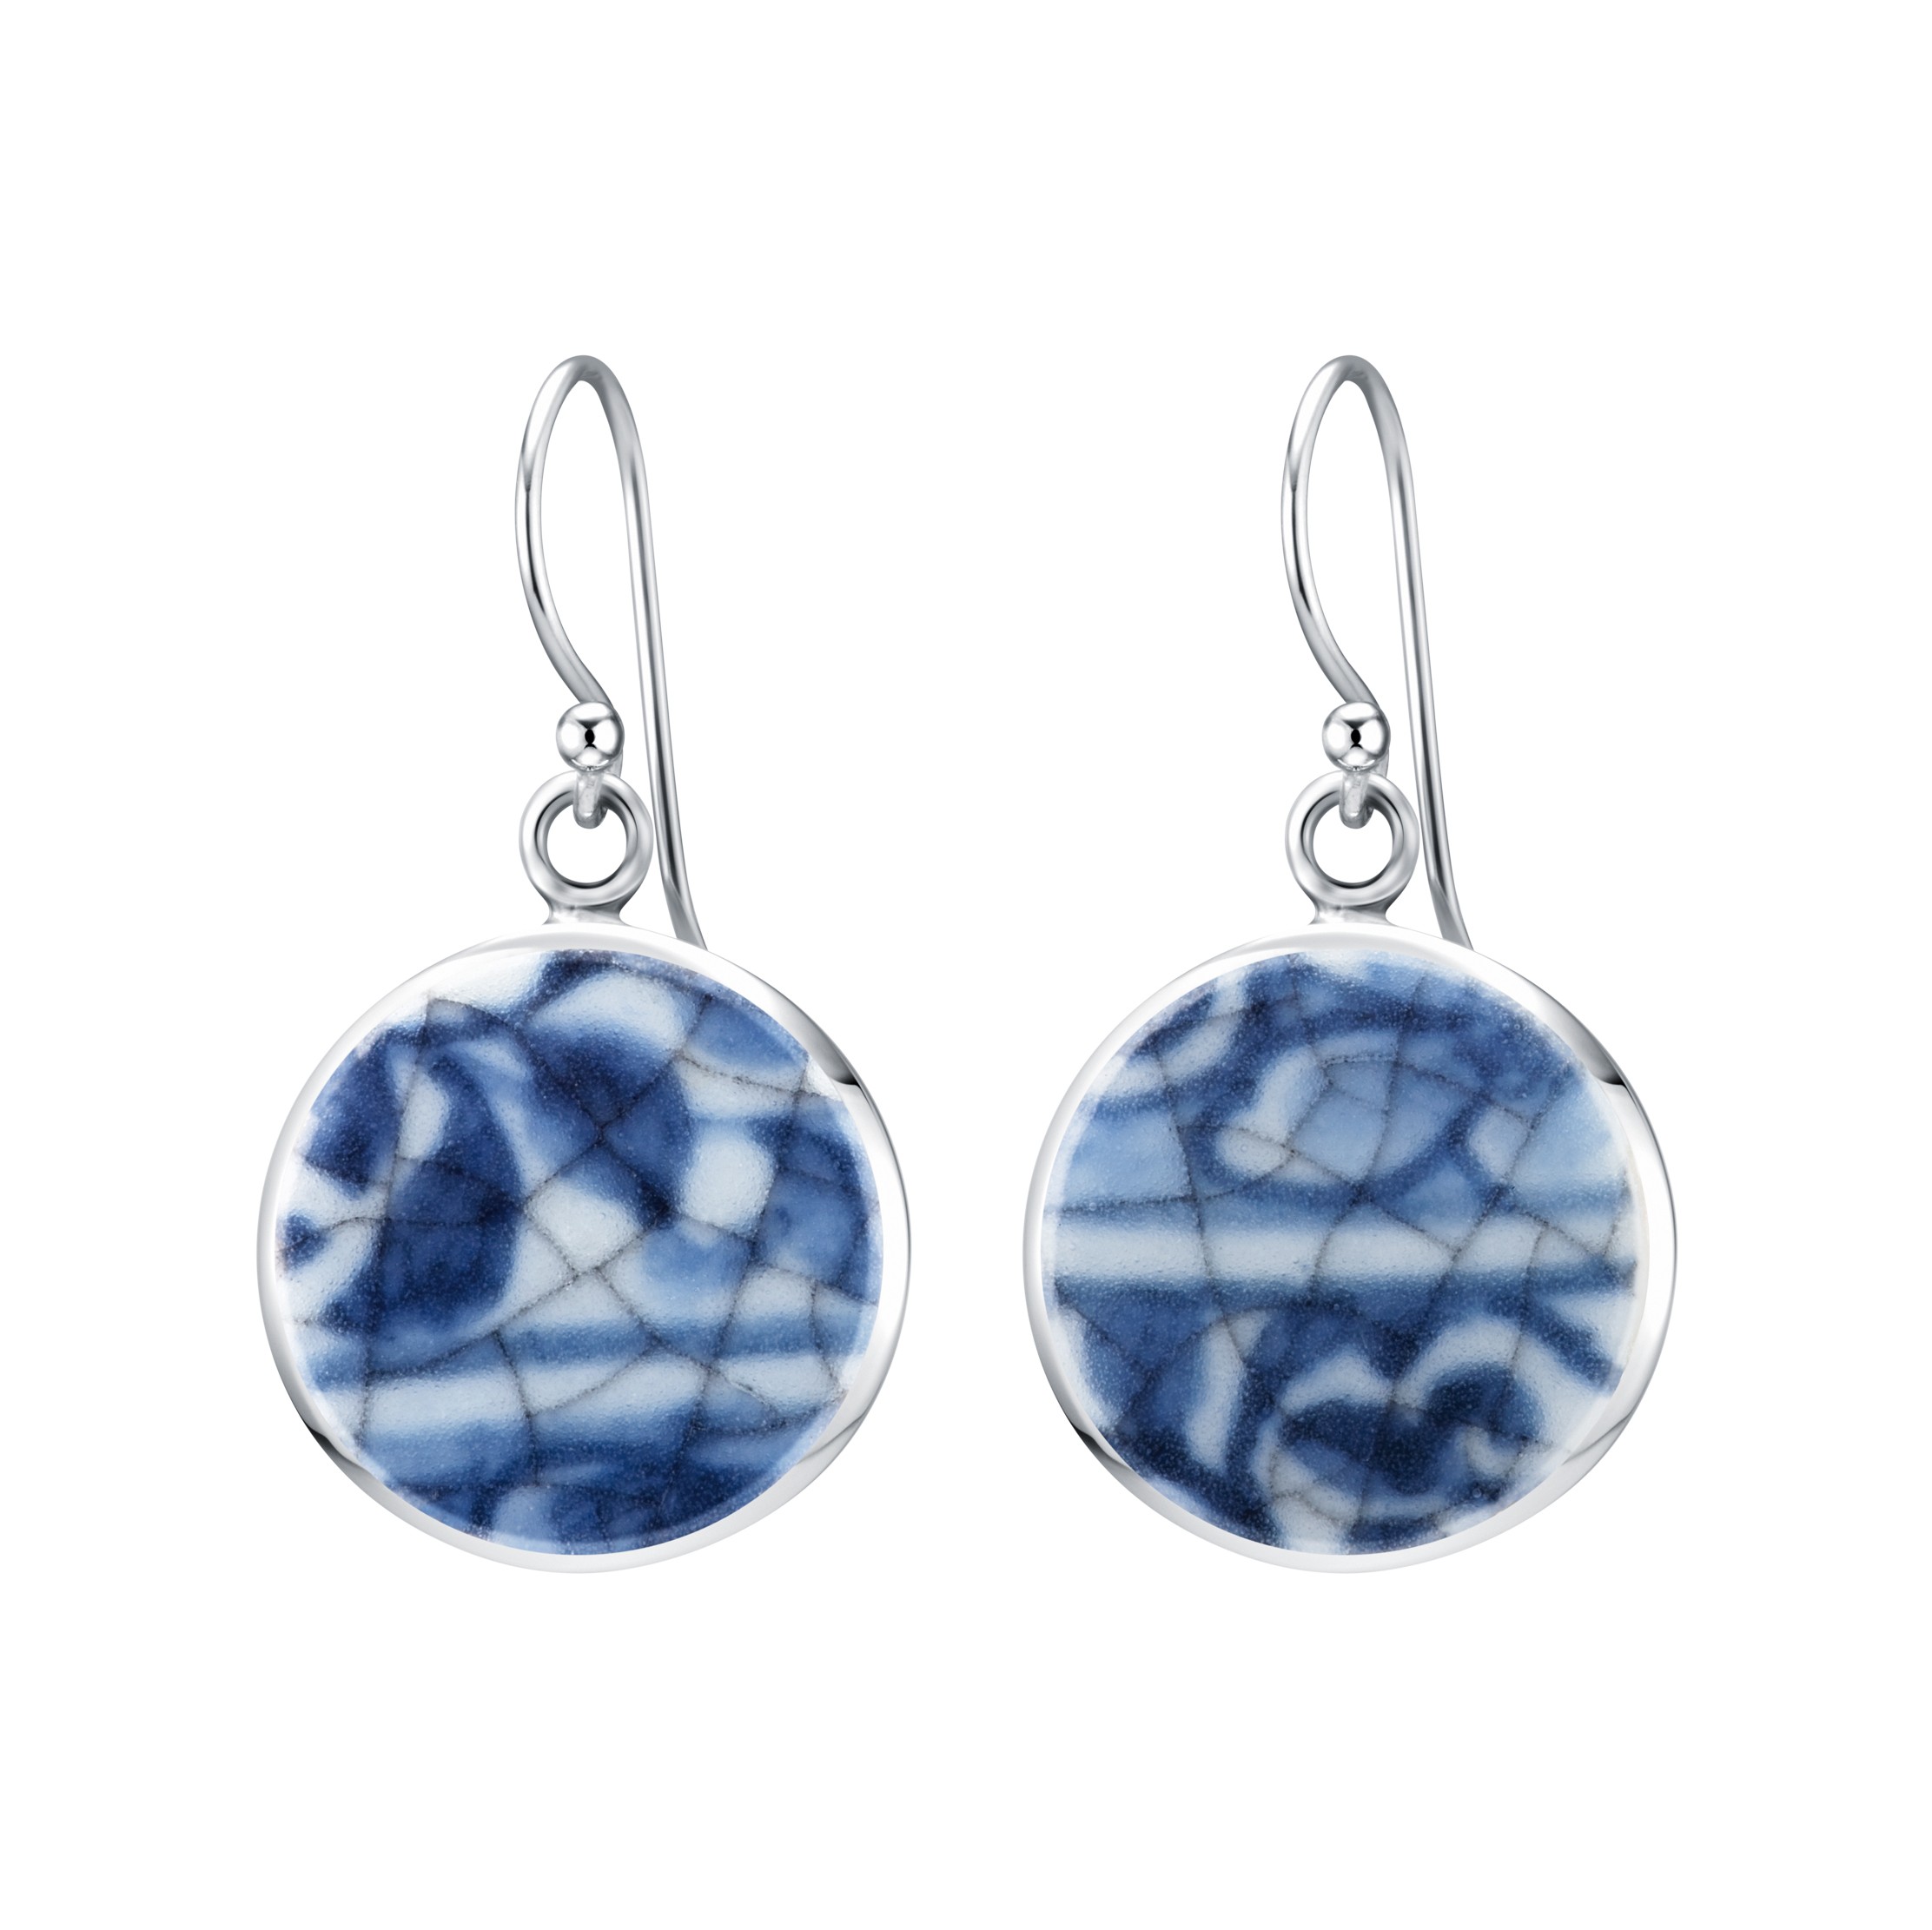 Fine China Porcelain in Round Sterling Silver Earrings